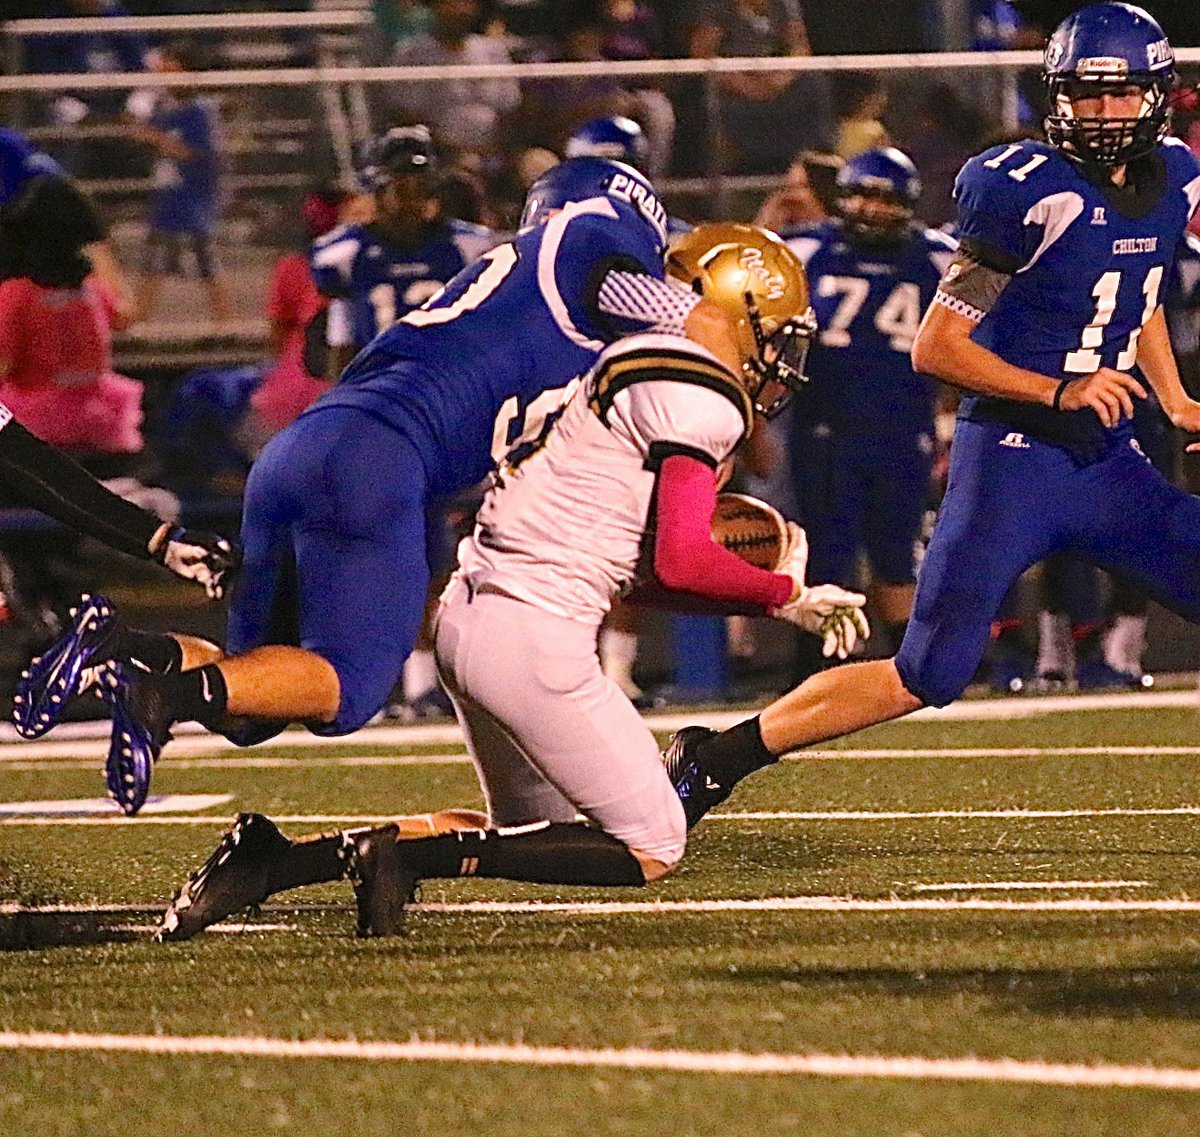 Image: Italy’s Clayton Miller(6) gets hogtied by a Pirate tackler during a kick return.